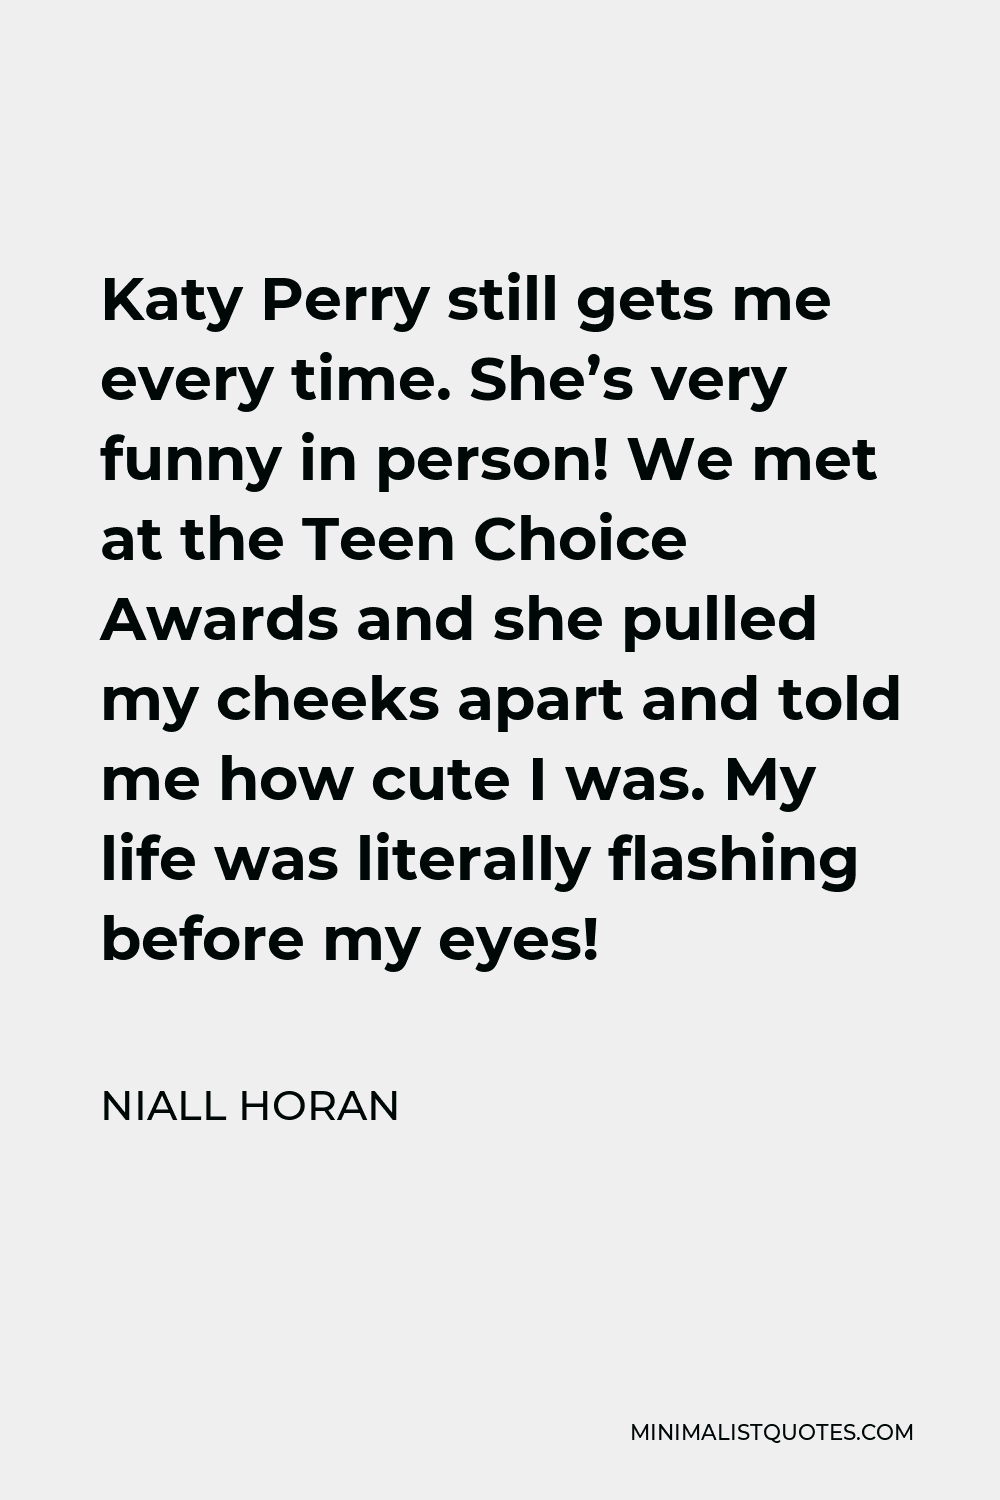 Niall Horan Quote - Katy Perry still gets me every time. She’s very funny in person! We met at the Teen Choice Awards and she pulled my cheeks apart and told me how cute I was. My life was literally flashing before my eyes!